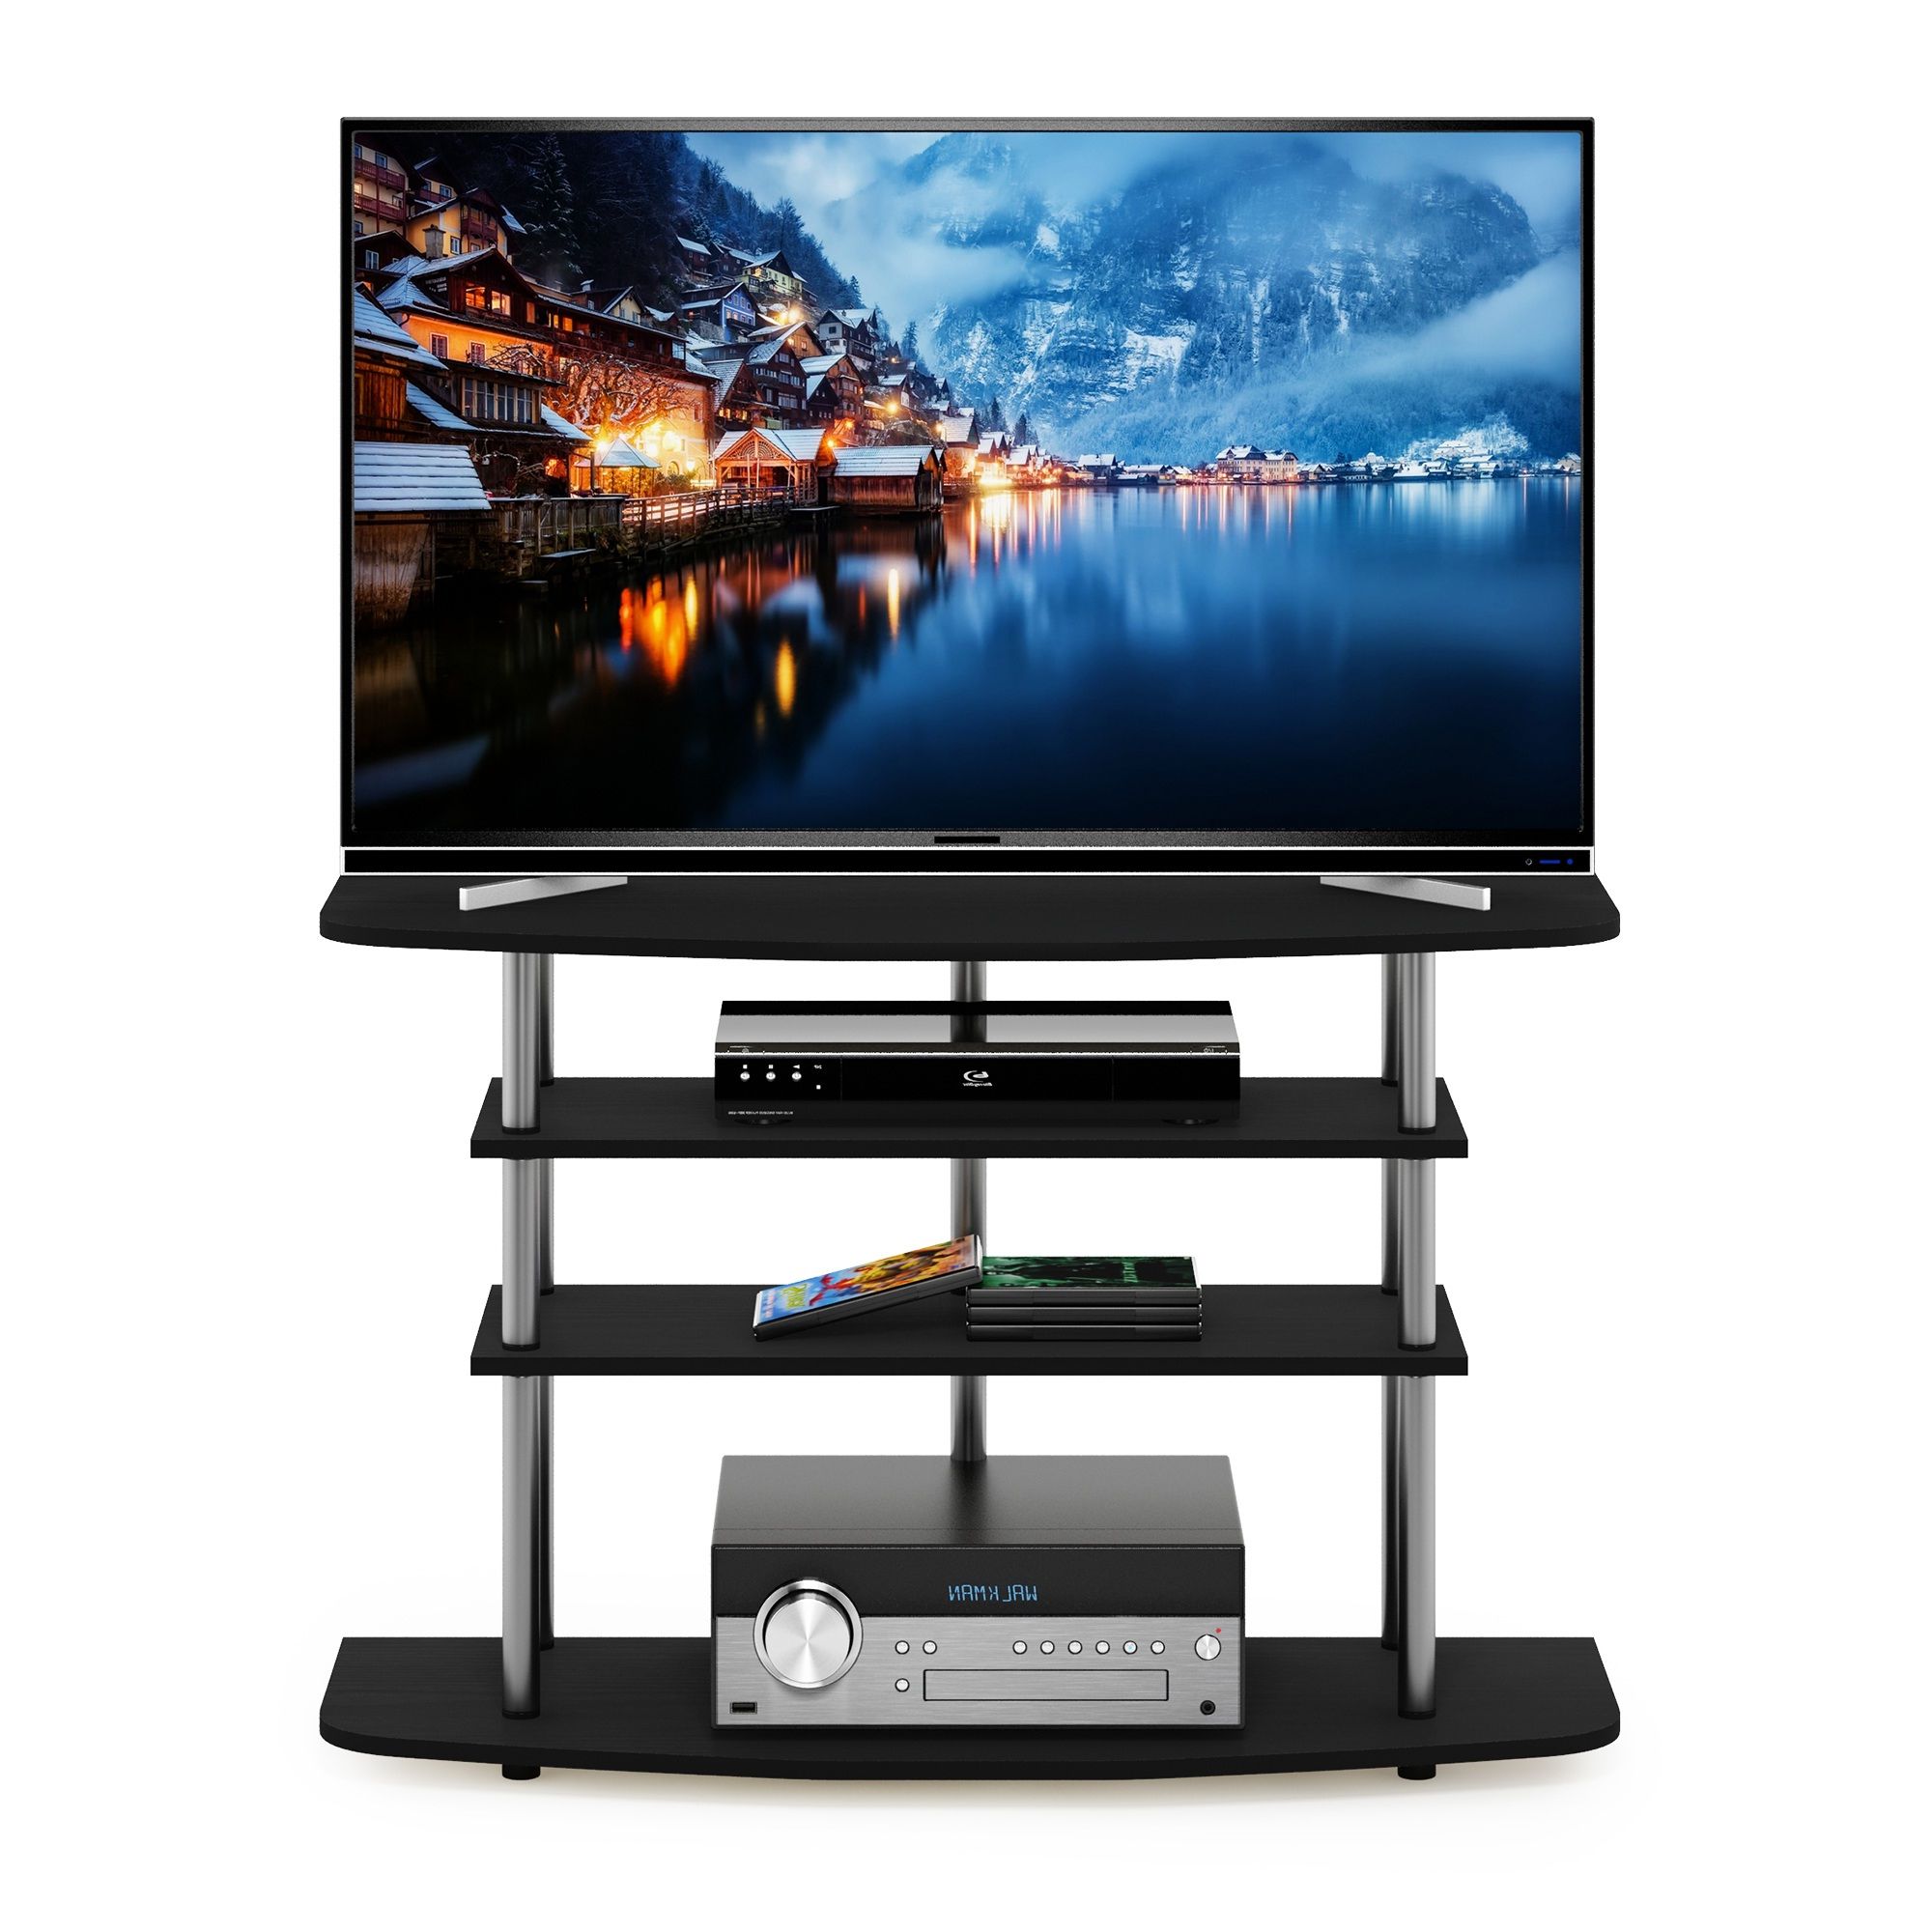 Furinno Frans Turn N Tube 4 Tier Tv Stand For Tv Up To 46 Within Furinno Jaya Large Tv Stands With Storage Bin (Gallery 15 of 20)